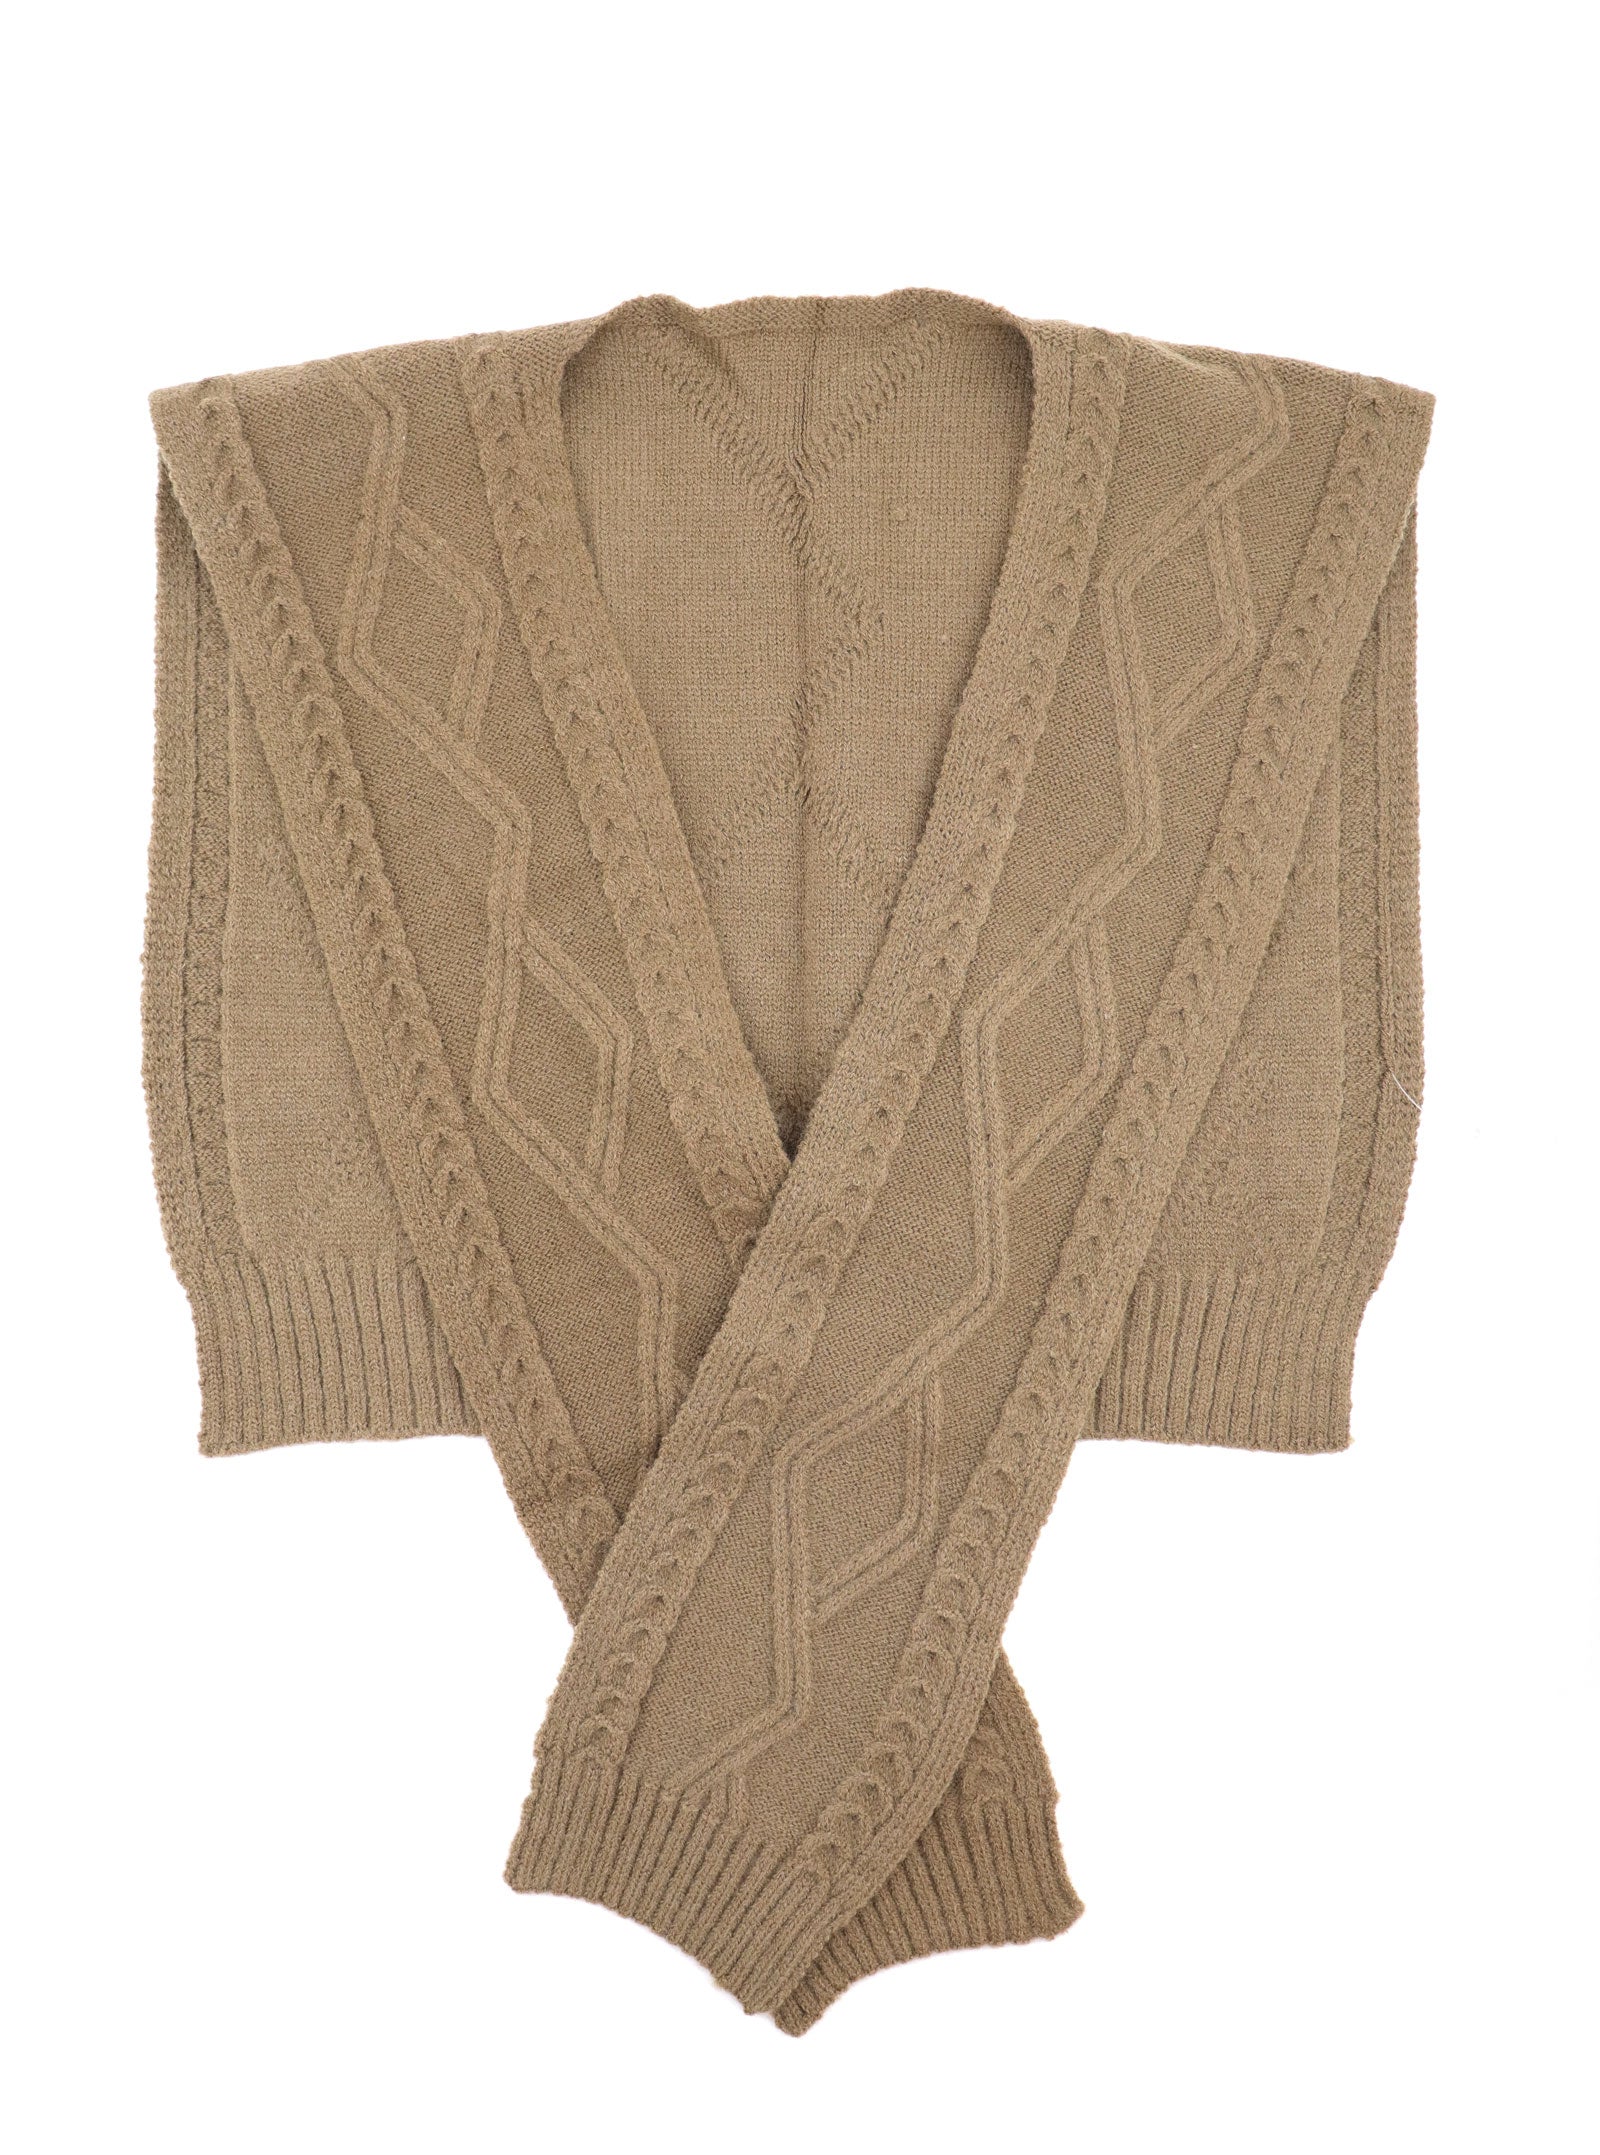 EVENA KNITTED STOLE